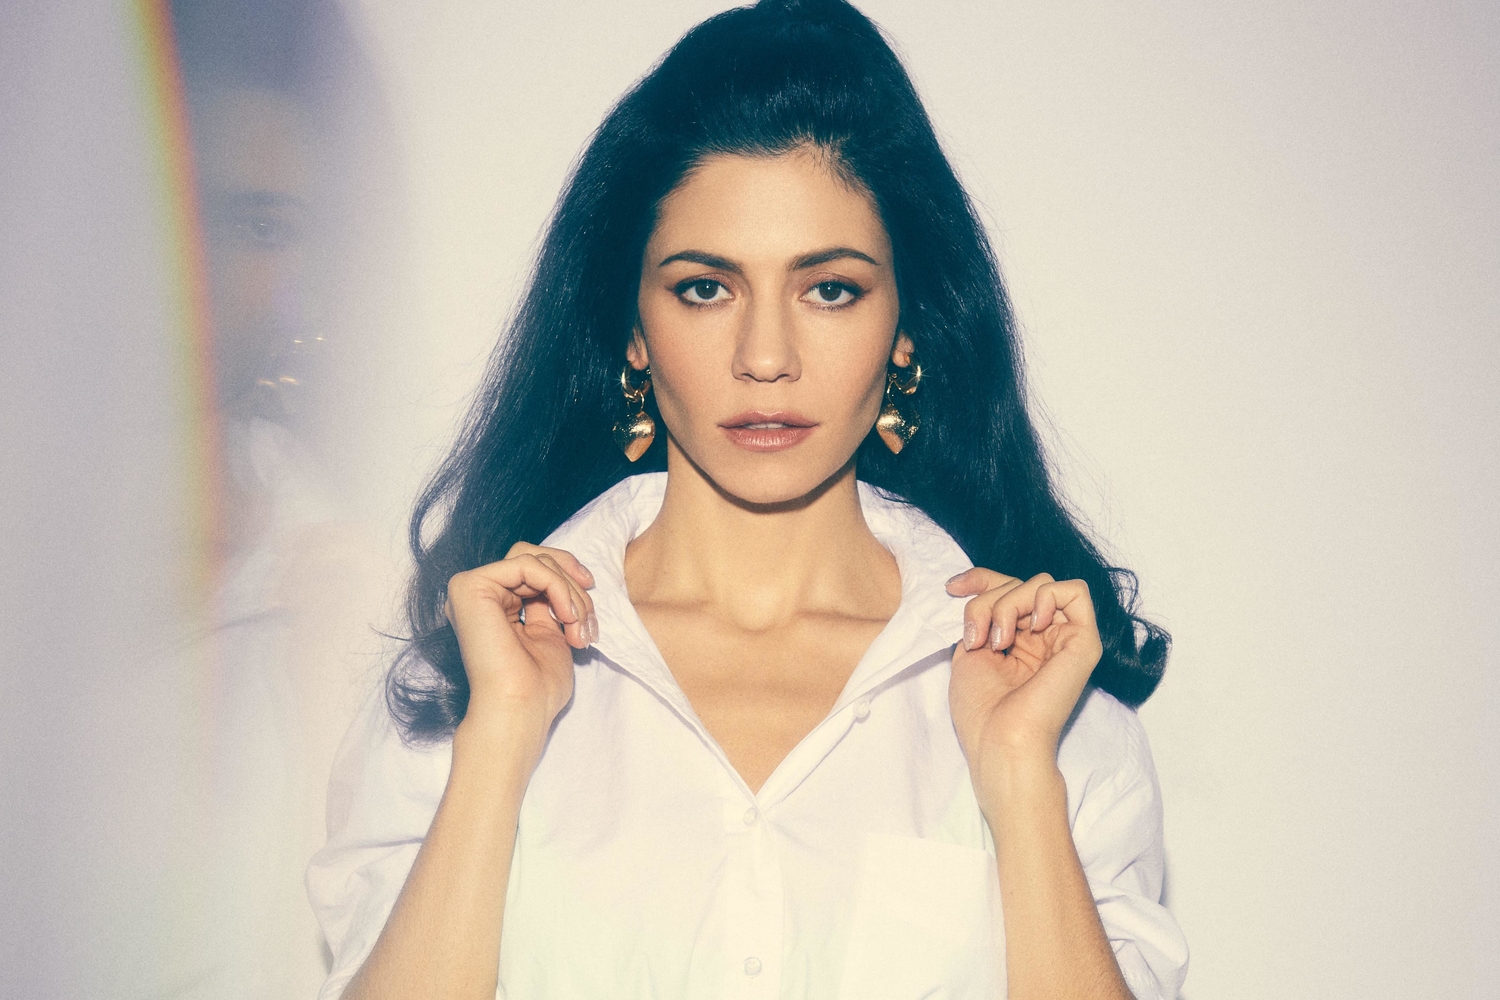 Marina joins the line-up for Portugal’s NOS Alive festival